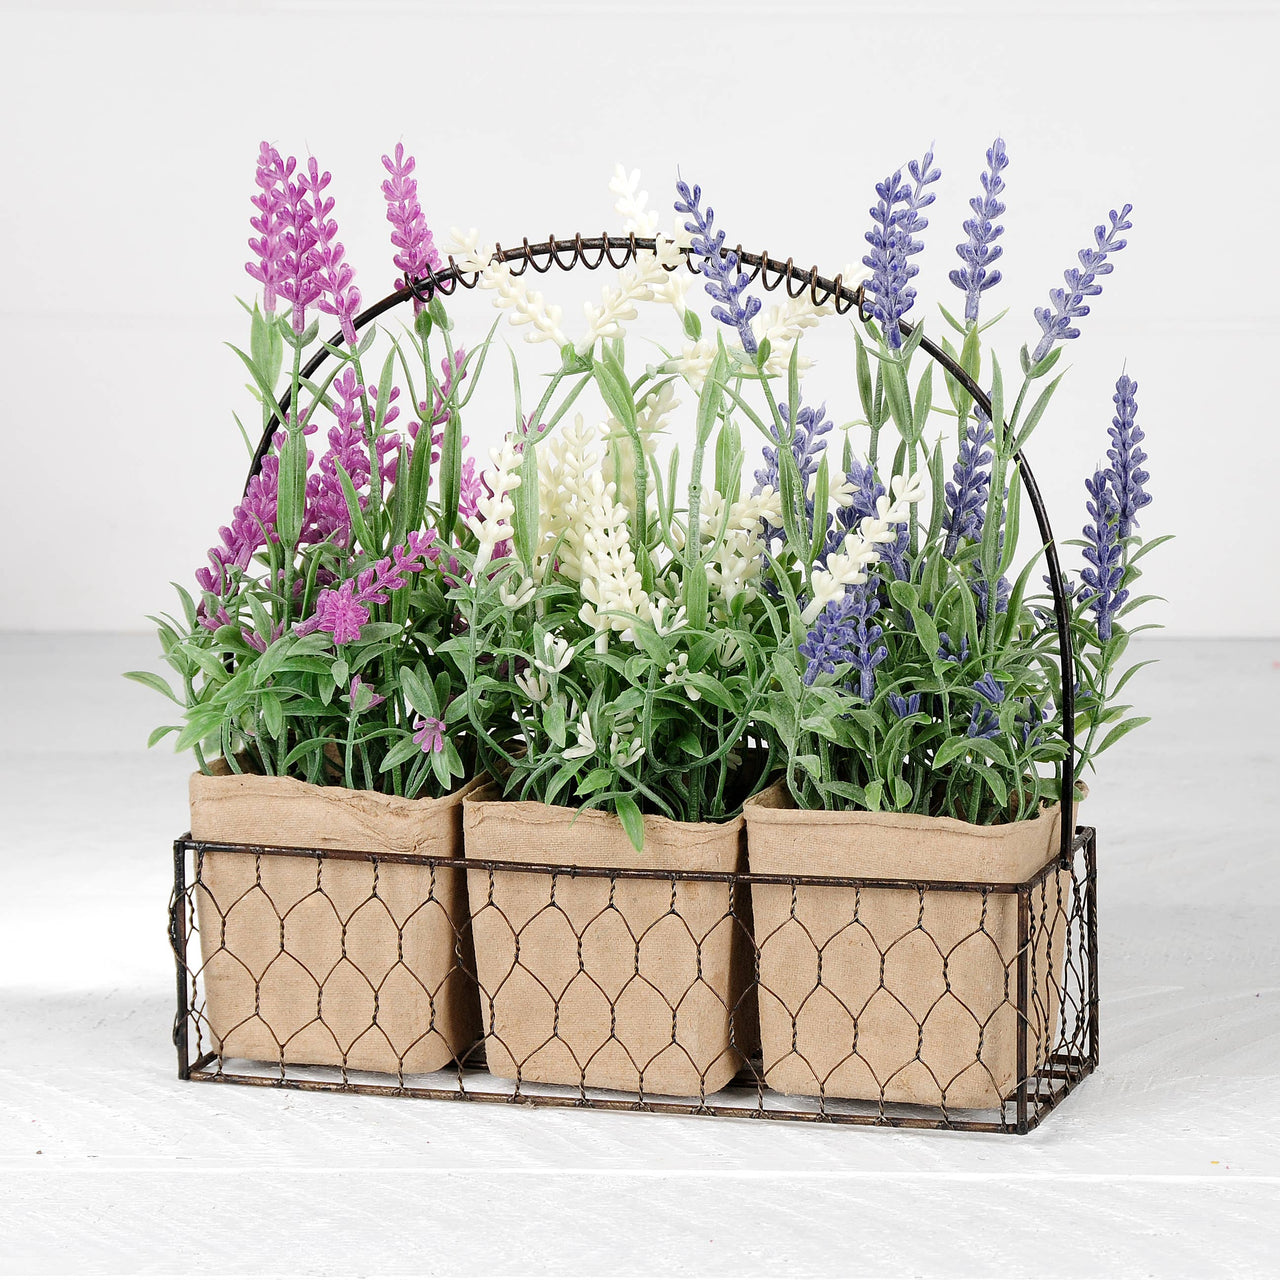 Wire Basket With Purple/White/Pink Flowers In Paper Pots